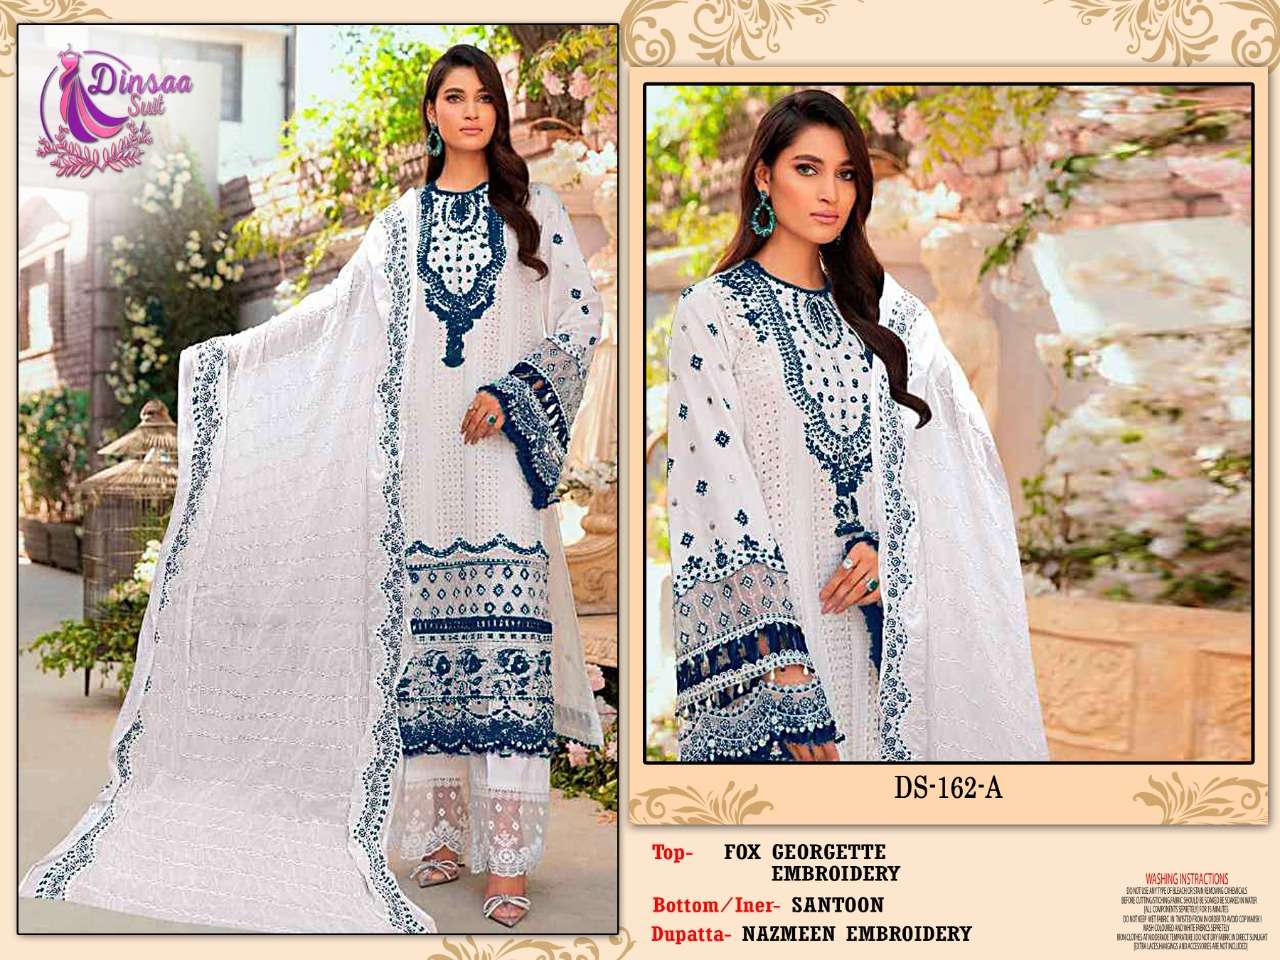 dinsaa 162 faux georgette with chikankari work pakistani suits new collection 